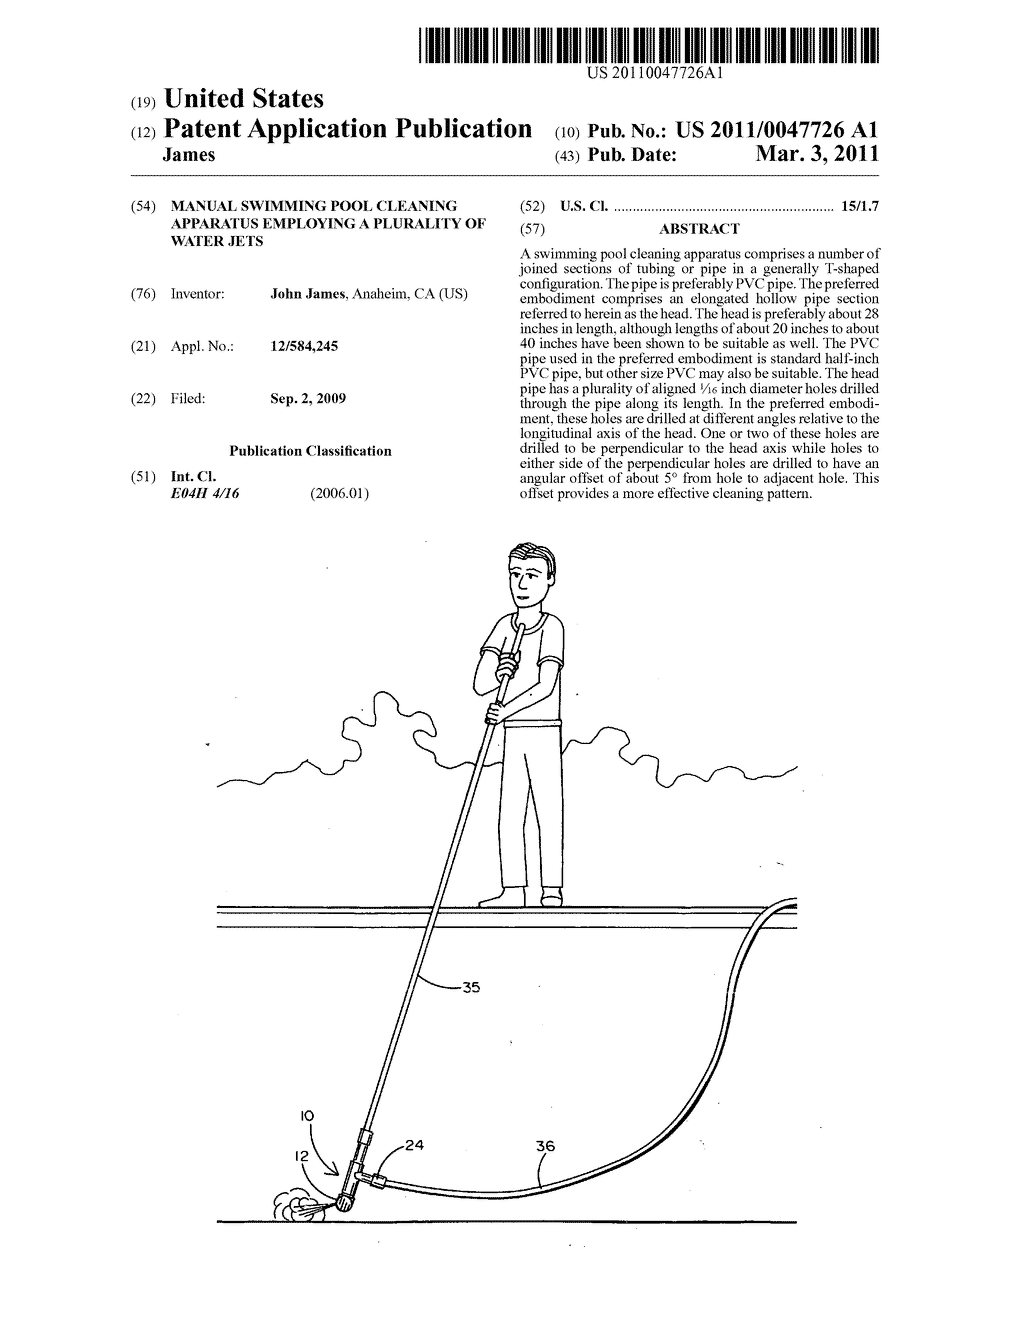 Manual swimming pool cleaning apparatus employing a plurality of water jets - diagram, schematic, and image 01